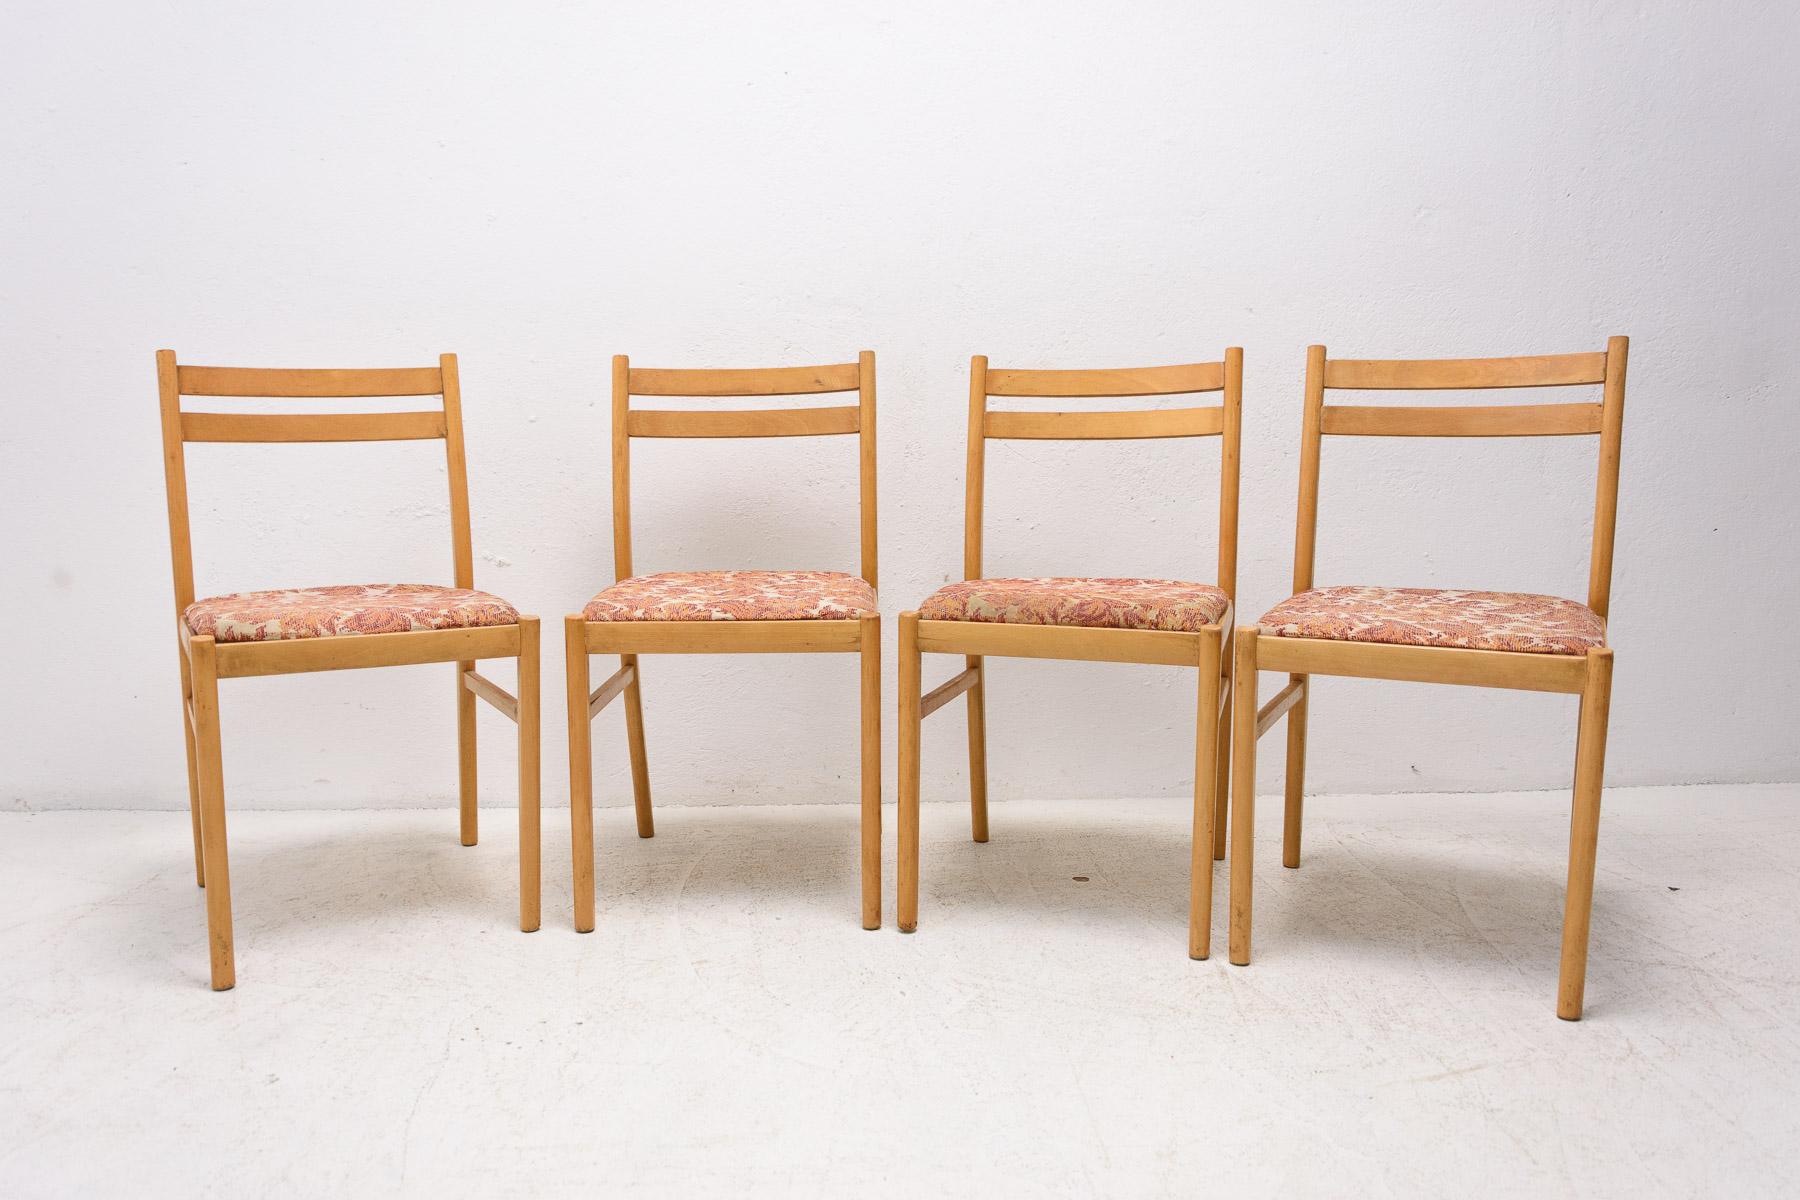 Mid century upholstered dining chairs, made in Czechoslovakia in the 1960´s. Beech wood, fabric. In good Vintage condition, without any damage, showing signs of age and using. Price is for the set of four.

Measures: Height: 80 cm

Seat: 42×41